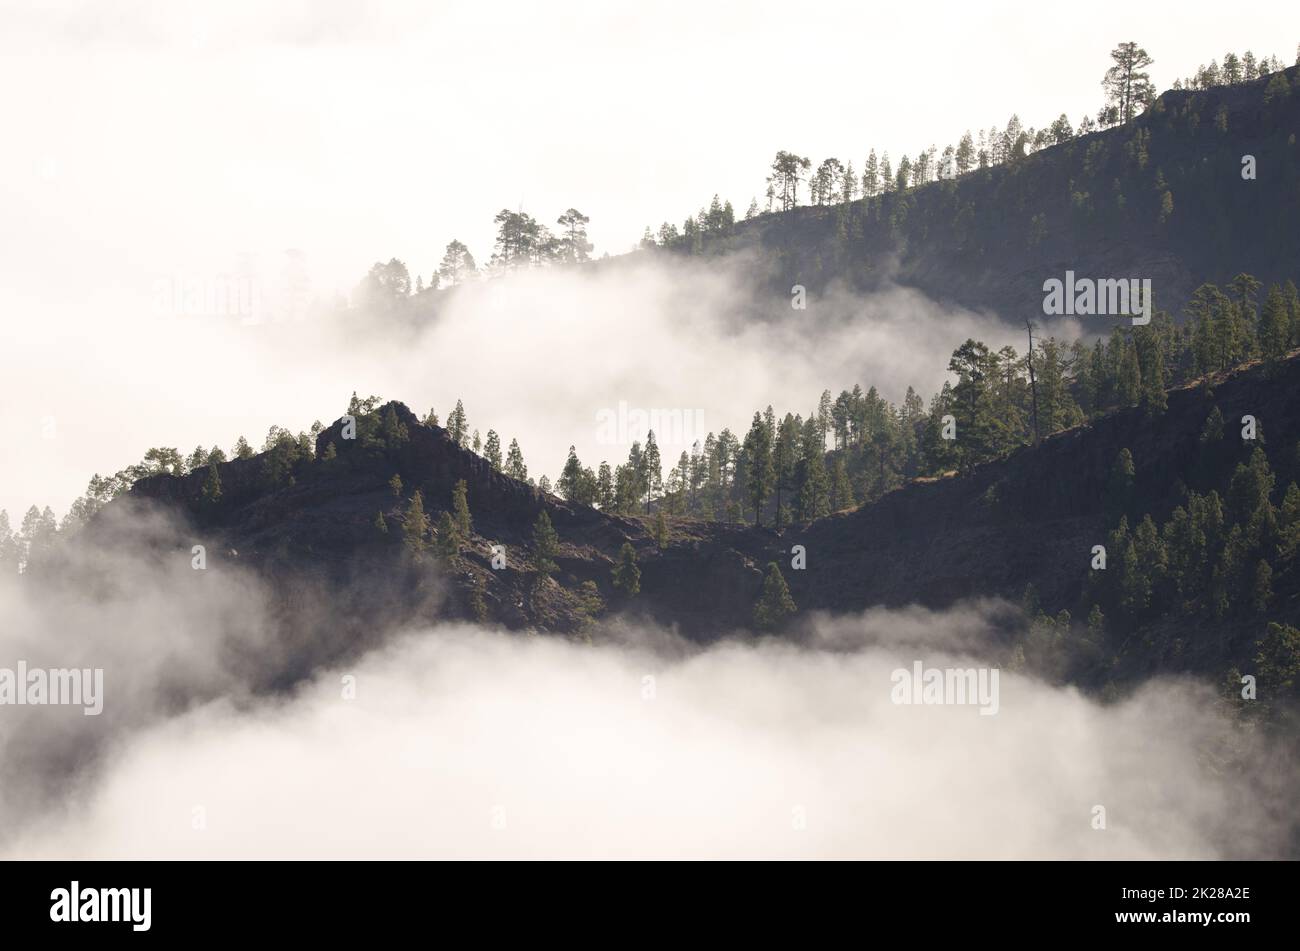 Slopes covered with forest of Canary Island pine among the clouds. Stock Photo